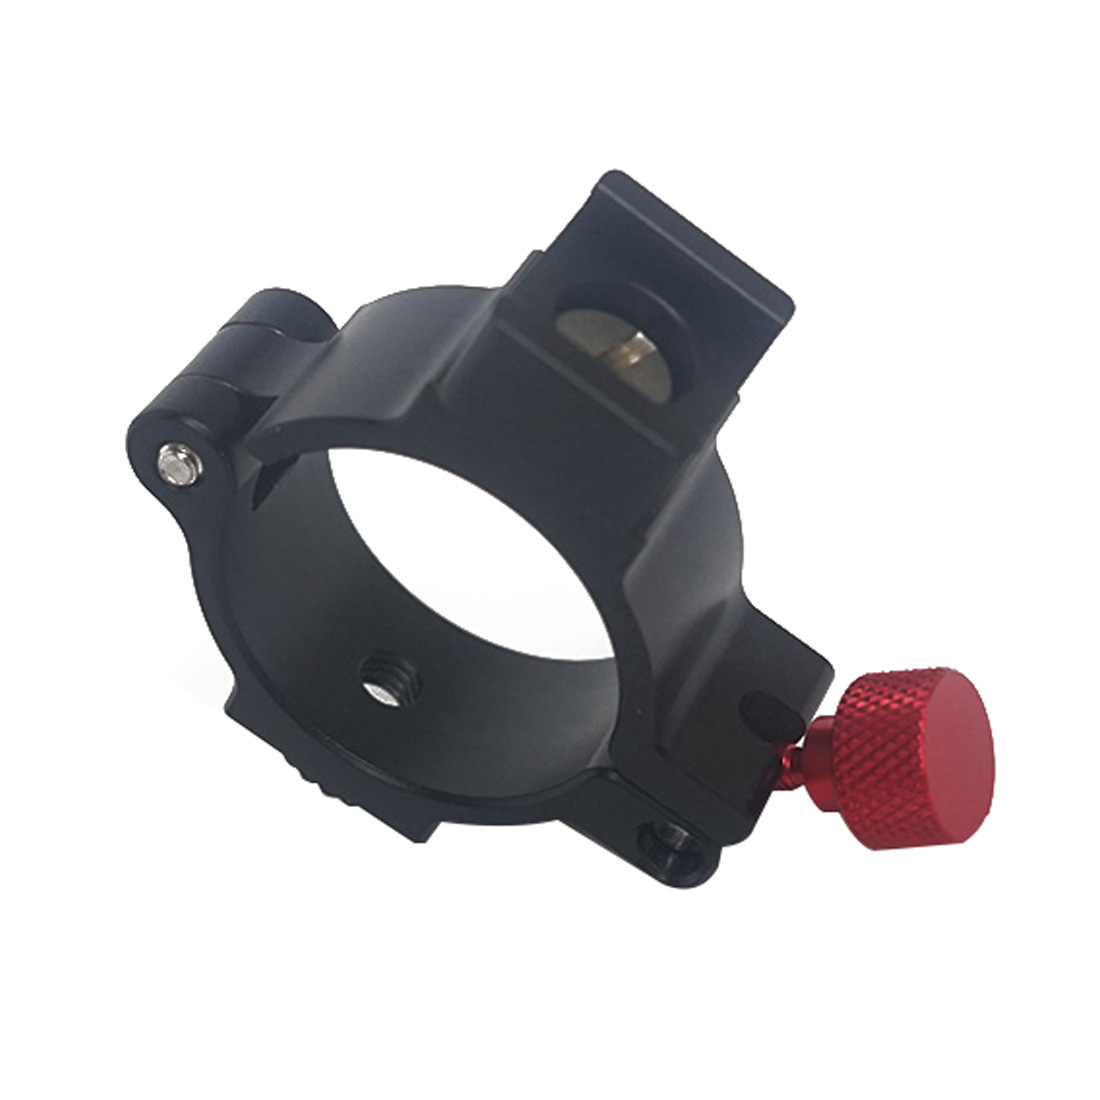 BGNING 1/4 Thread Extension Mounting Ring Expansion Clip for Feiyu SPG2 G6 G6plus Gimbal Stabilizer